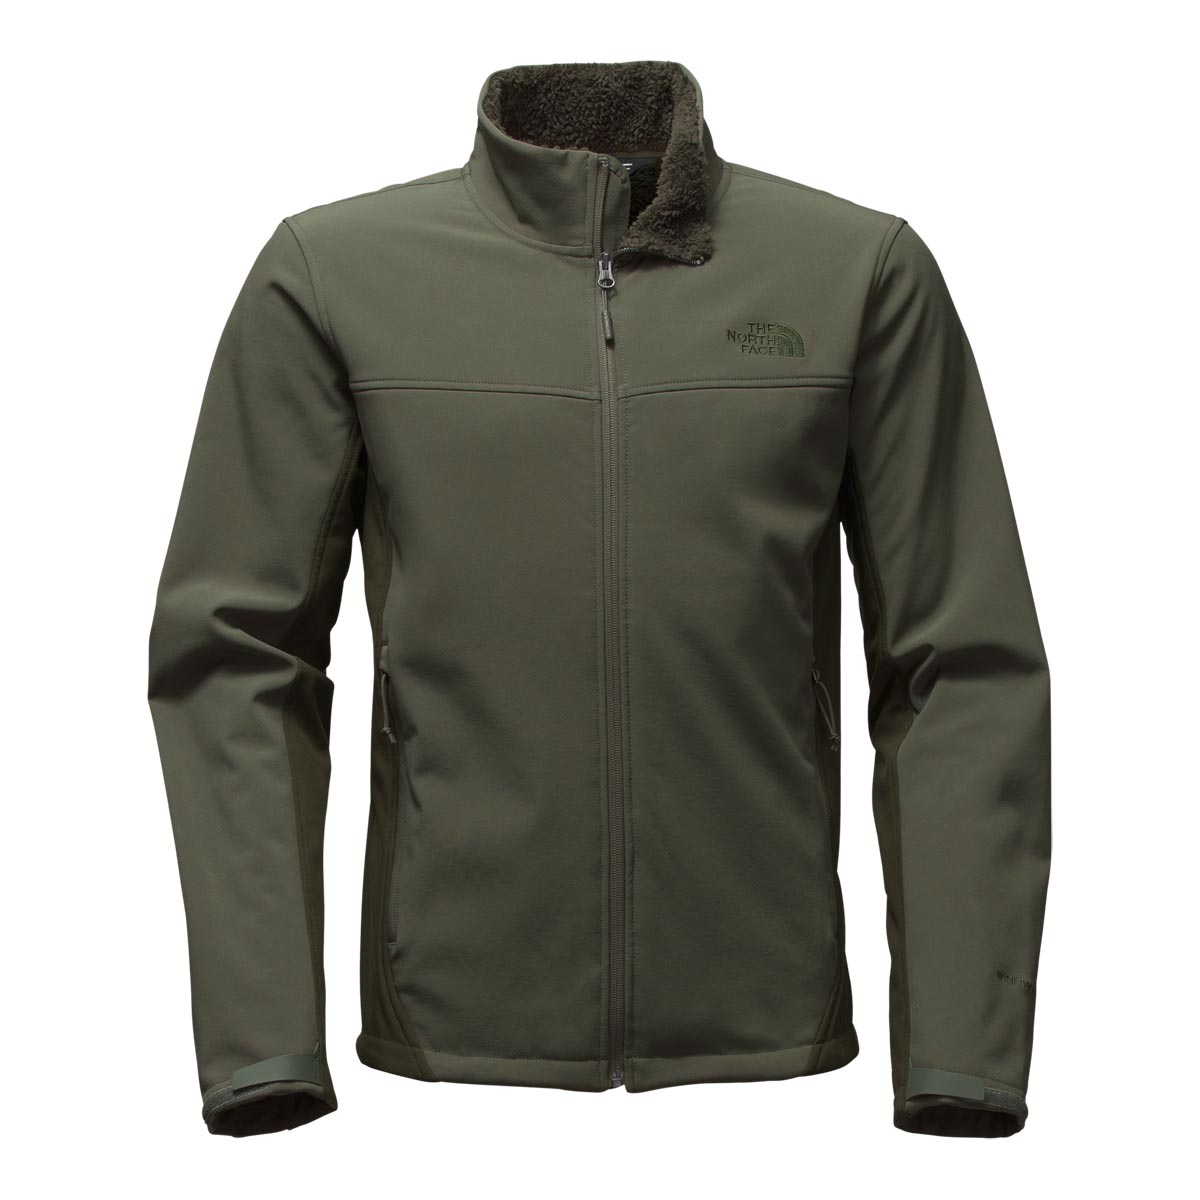 The North Face Men's Apex Chromium Thermal Jacket Discontinued Pricing